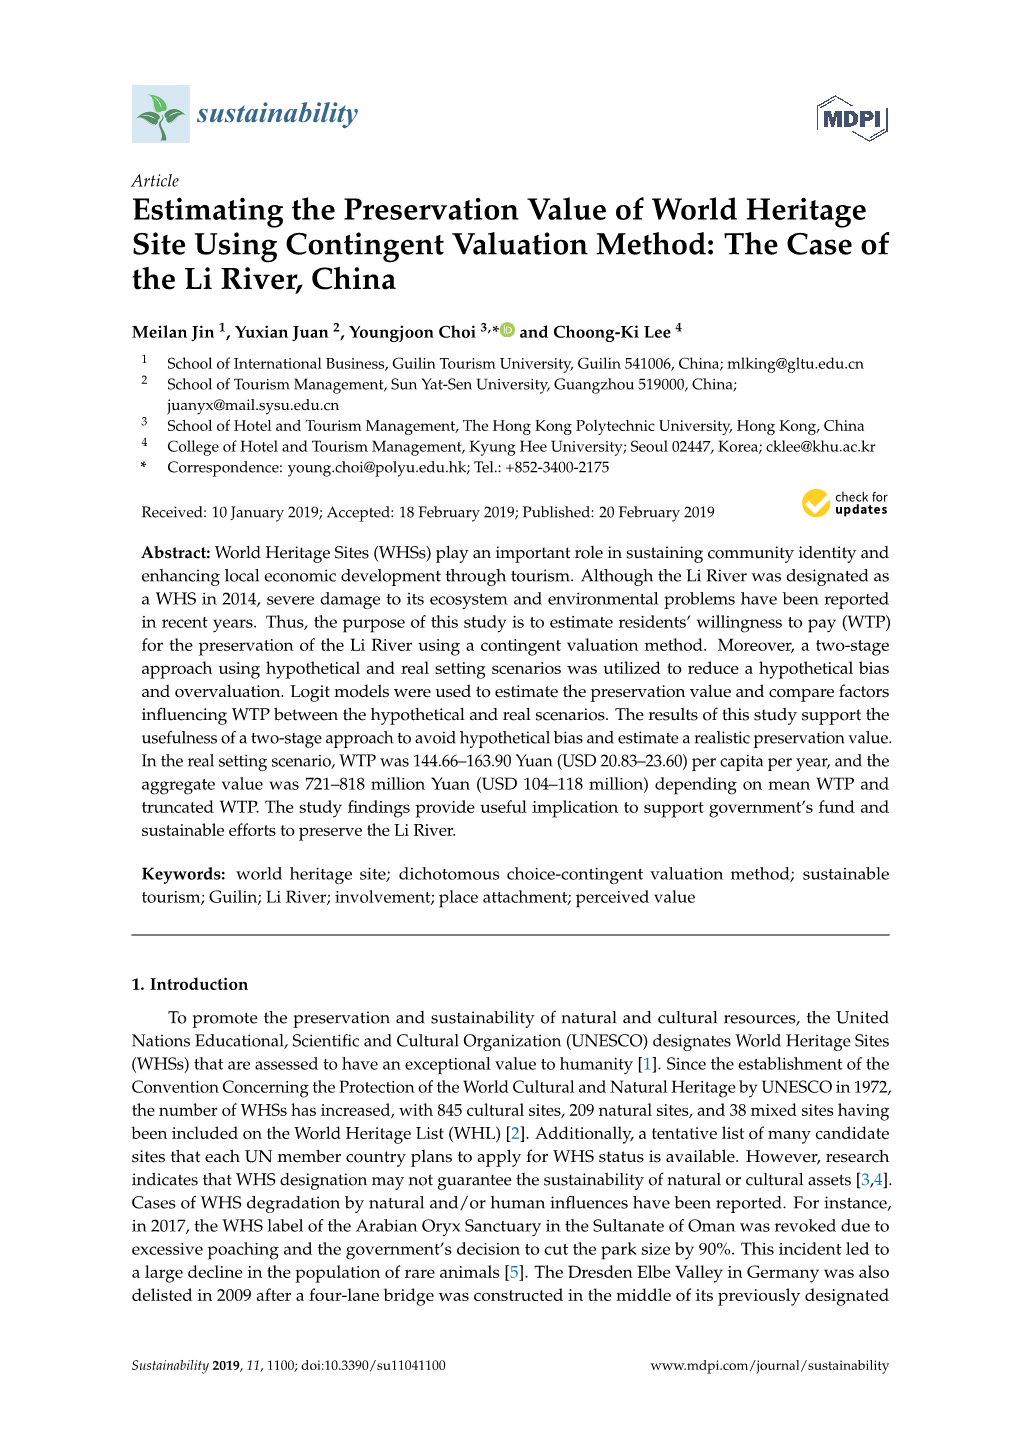 Estimating the Preservation Value of World Heritage Site Using Contingent Valuation Method: the Case of the Li River, China